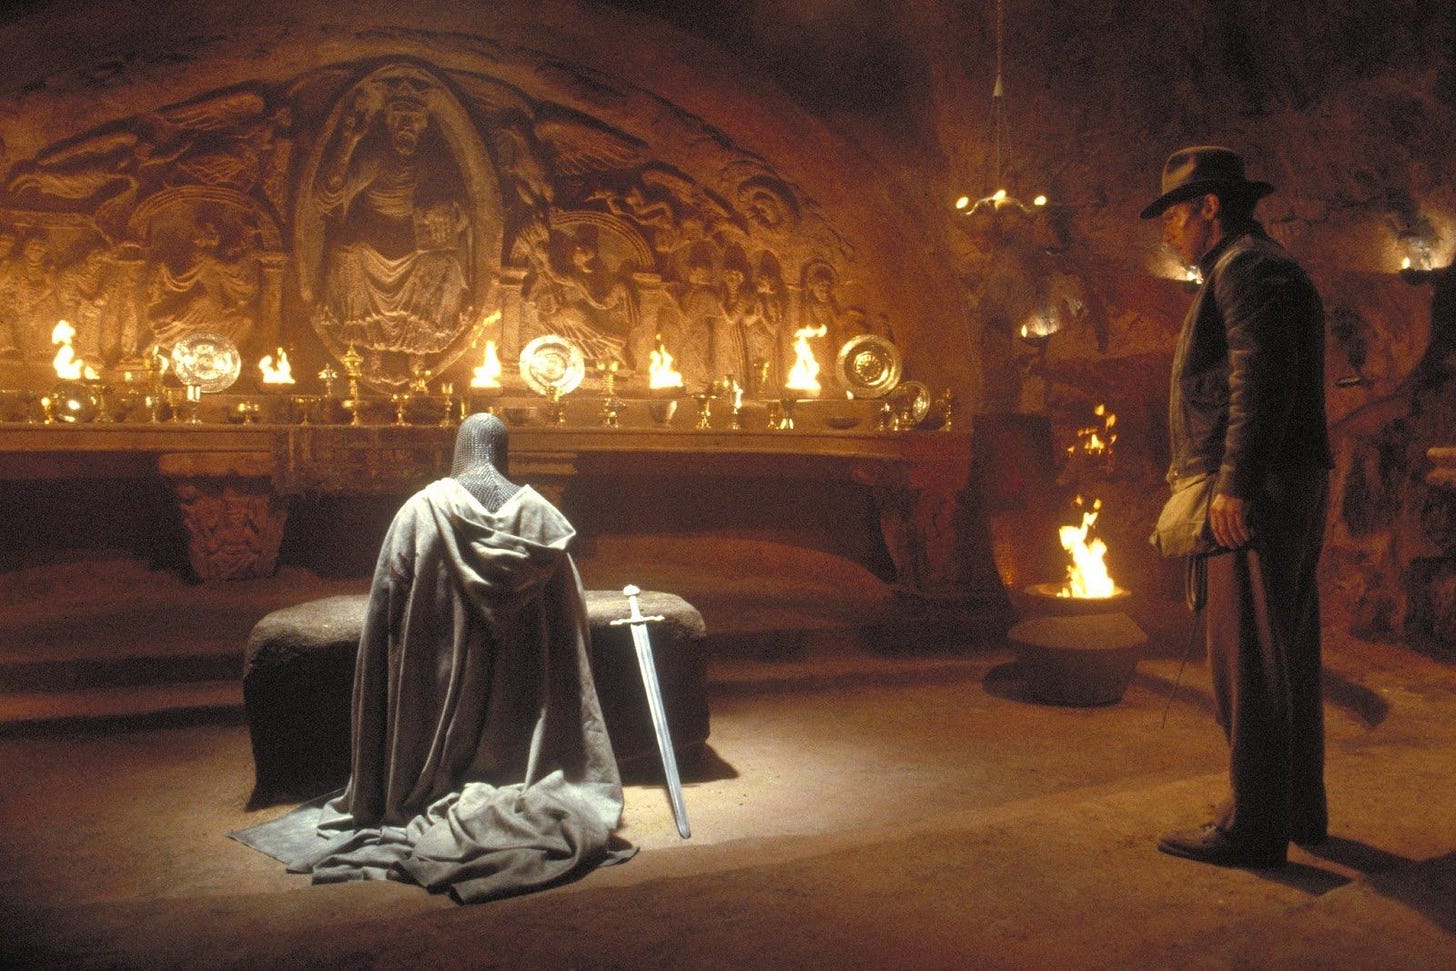 Image: A still from the climax of Indiana Jones and the Last Crusade, as Indiana Jones must choose the correct Holy Grail from countless imposters 